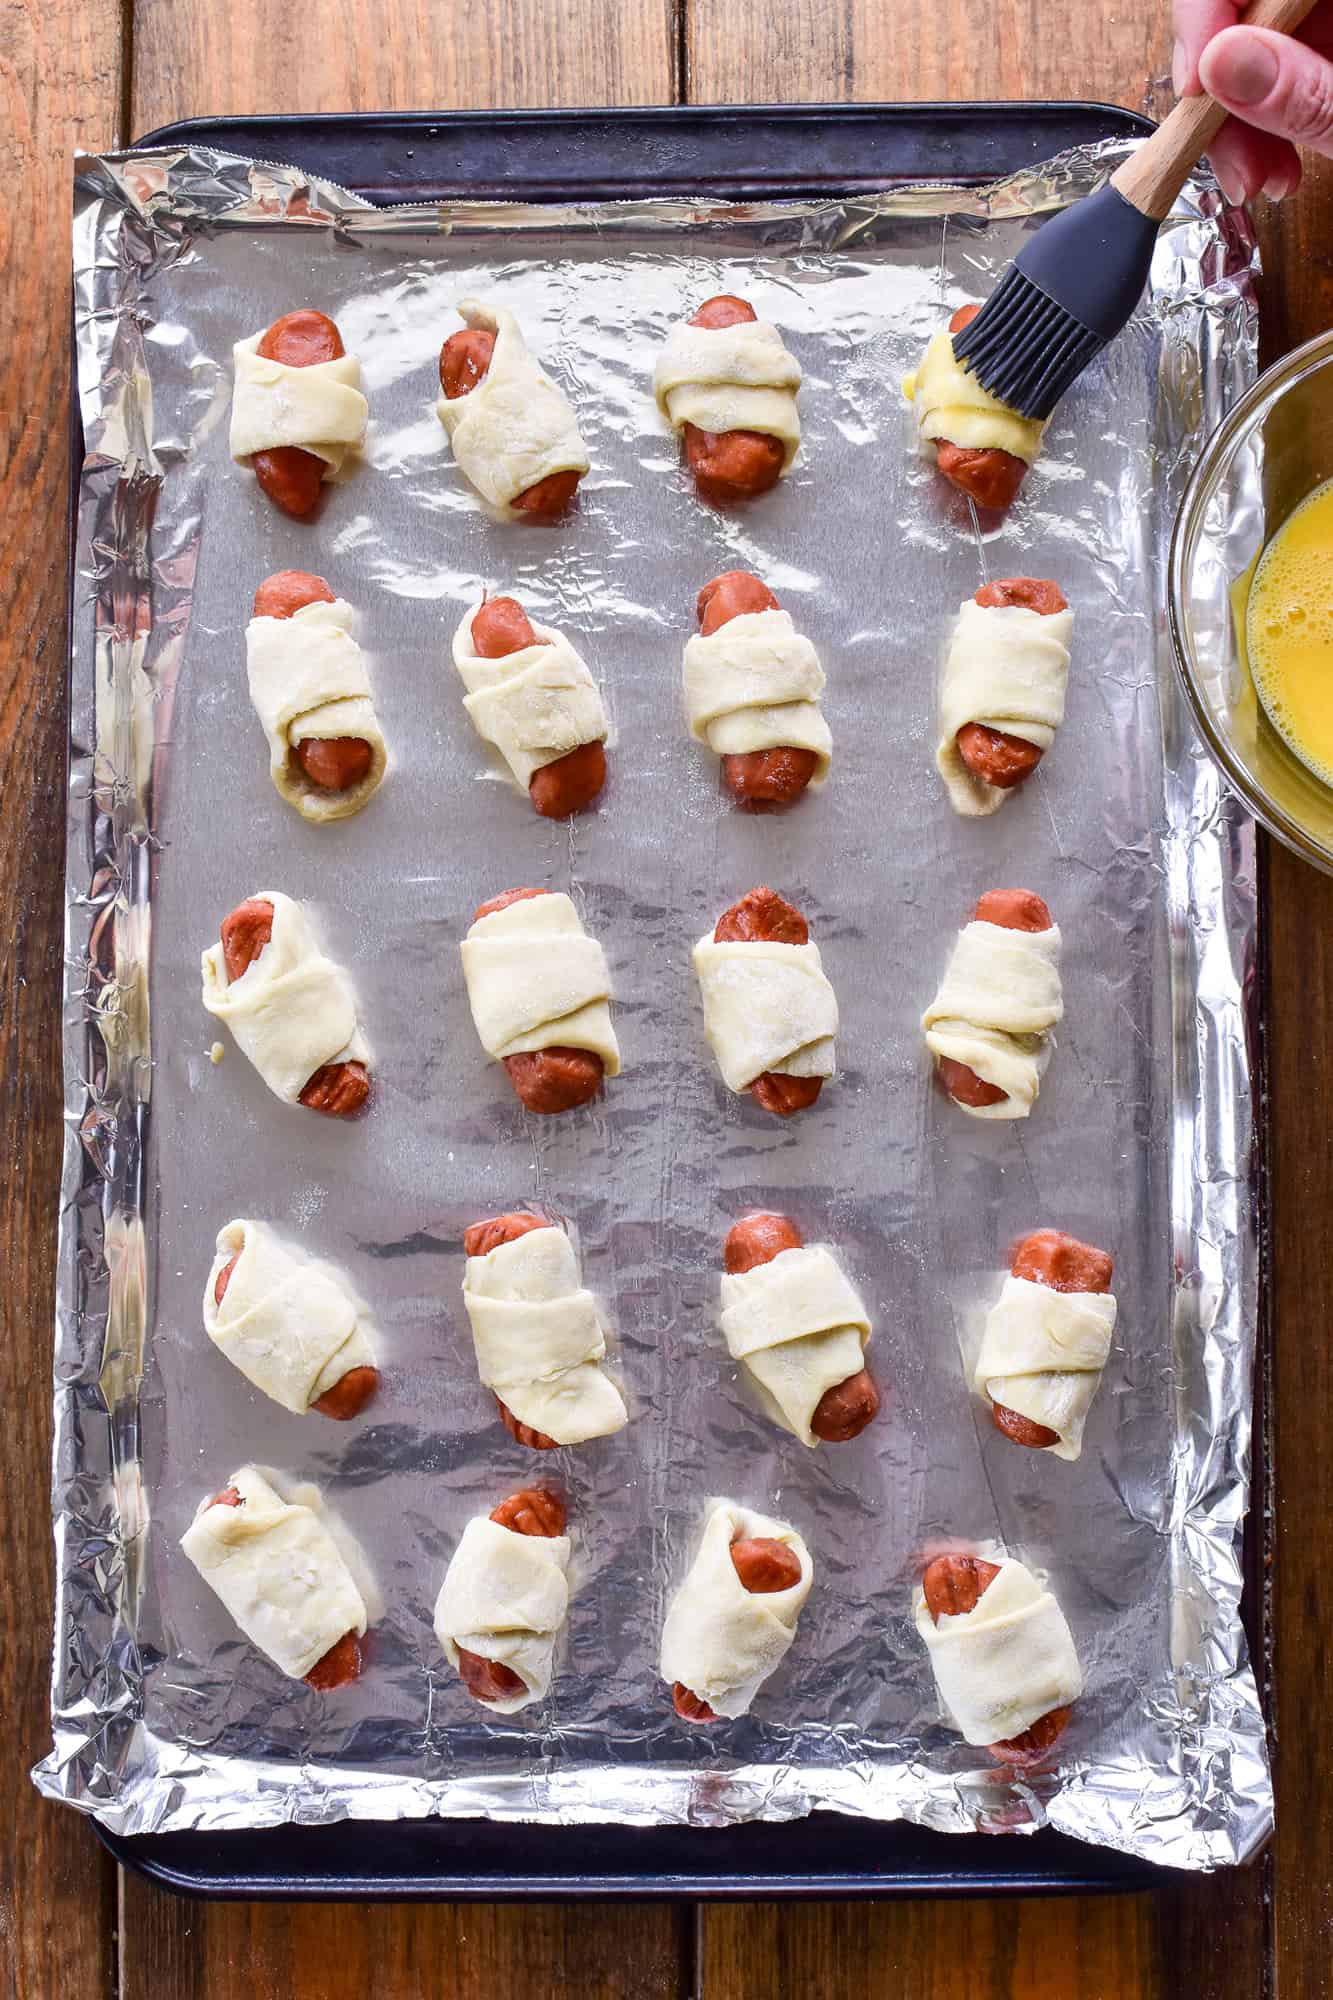 Unbaked Pigs in a Blanket on a baking sheet